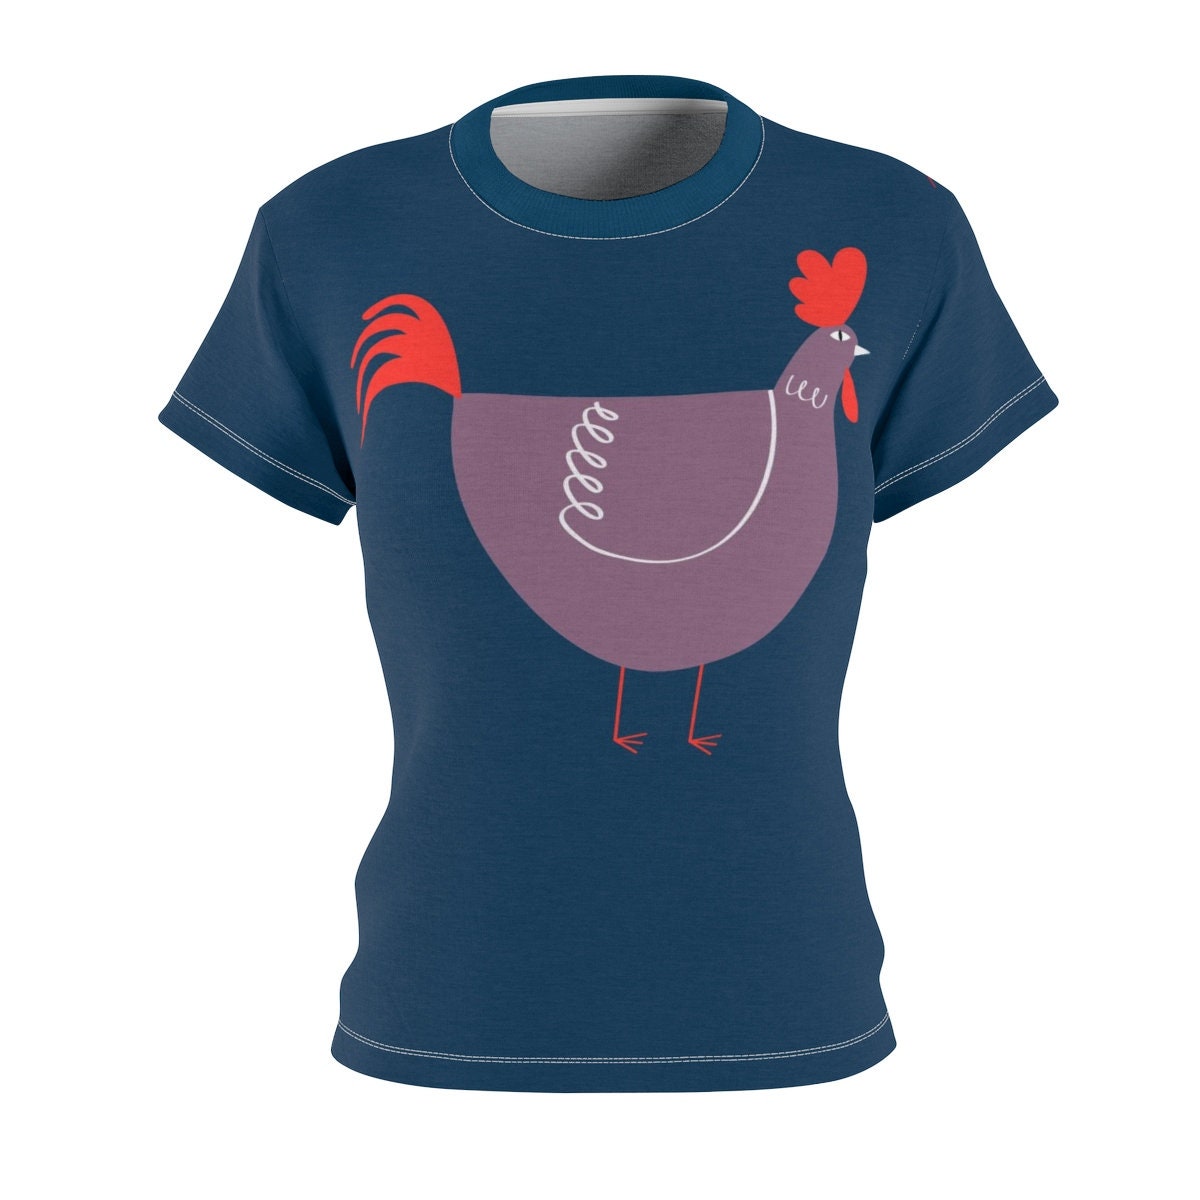 Year of the Rooster / Astrology / Chinese / Zodiac / T-shirt / Tee / Shirt / Rooster / Art / Valentine / Birthday / Clothing / Gift for Her - Chloe Lambertin